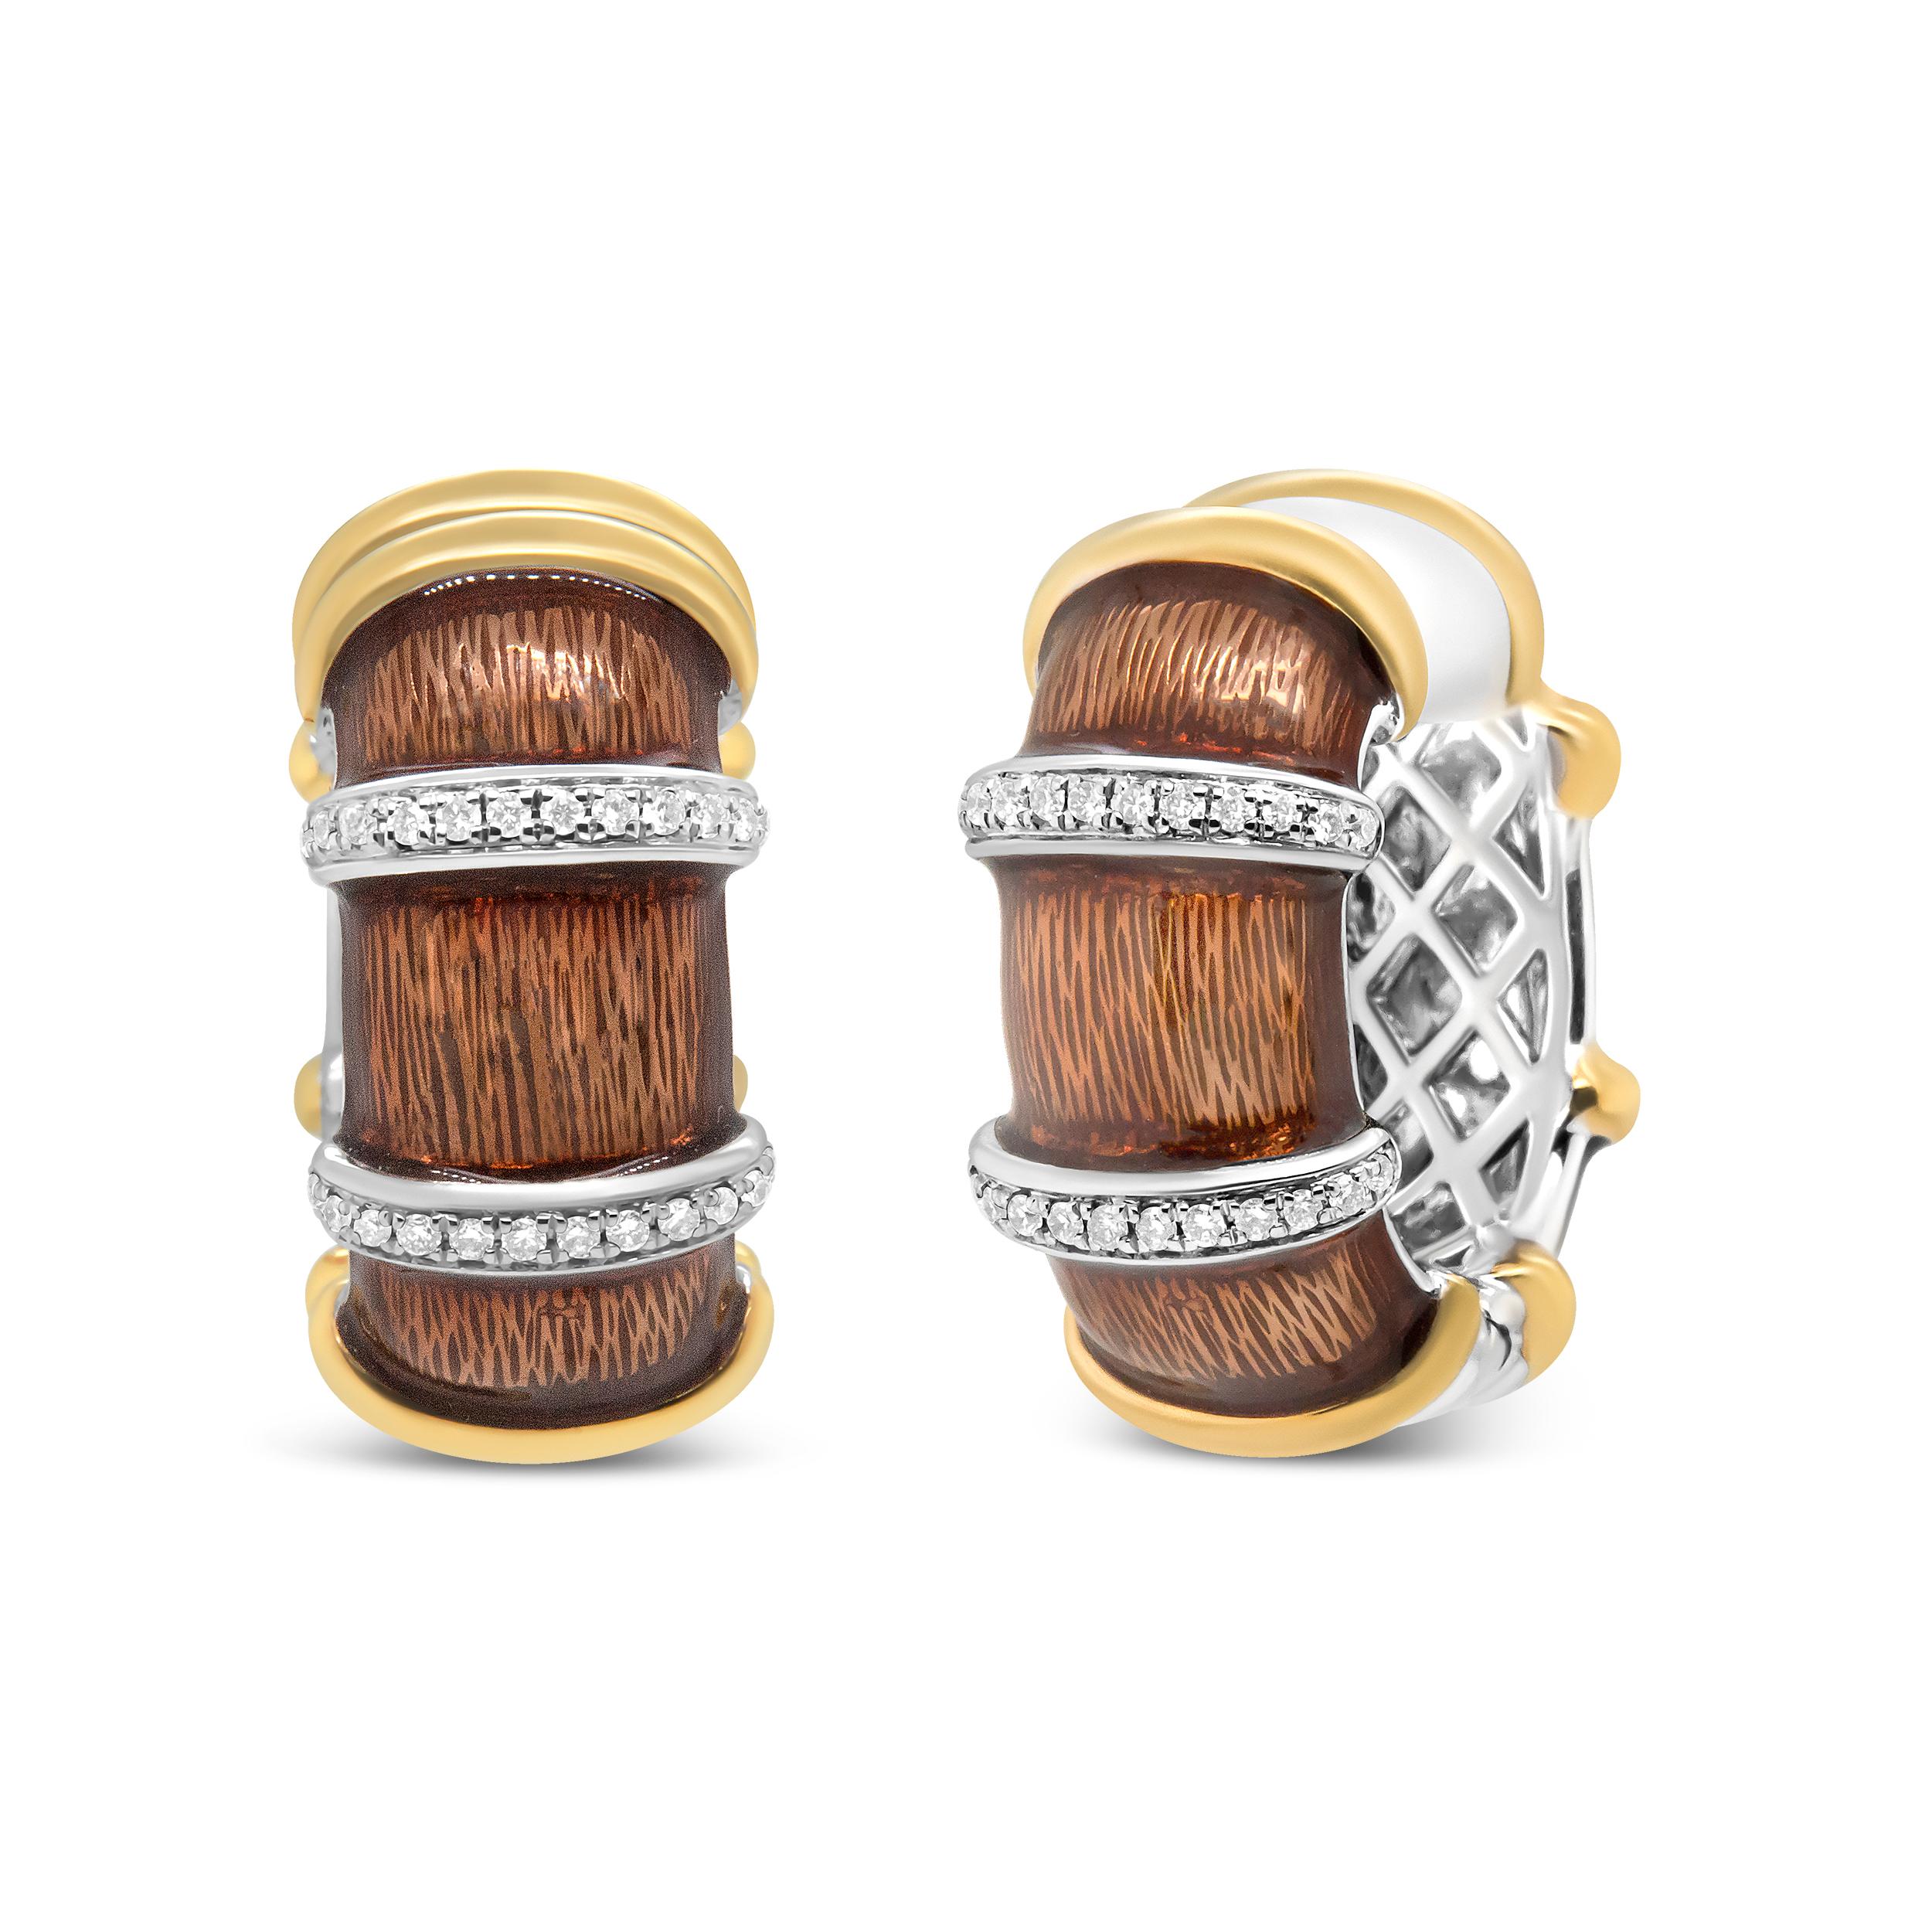 Add color to your jewelry collection with these huggie hoop earrings made from 18k yellow and white gold flash plated .925 sterling silver with clear brown enamel. These evocative earrings are rich in color as they are intricate metalwork. Rows of